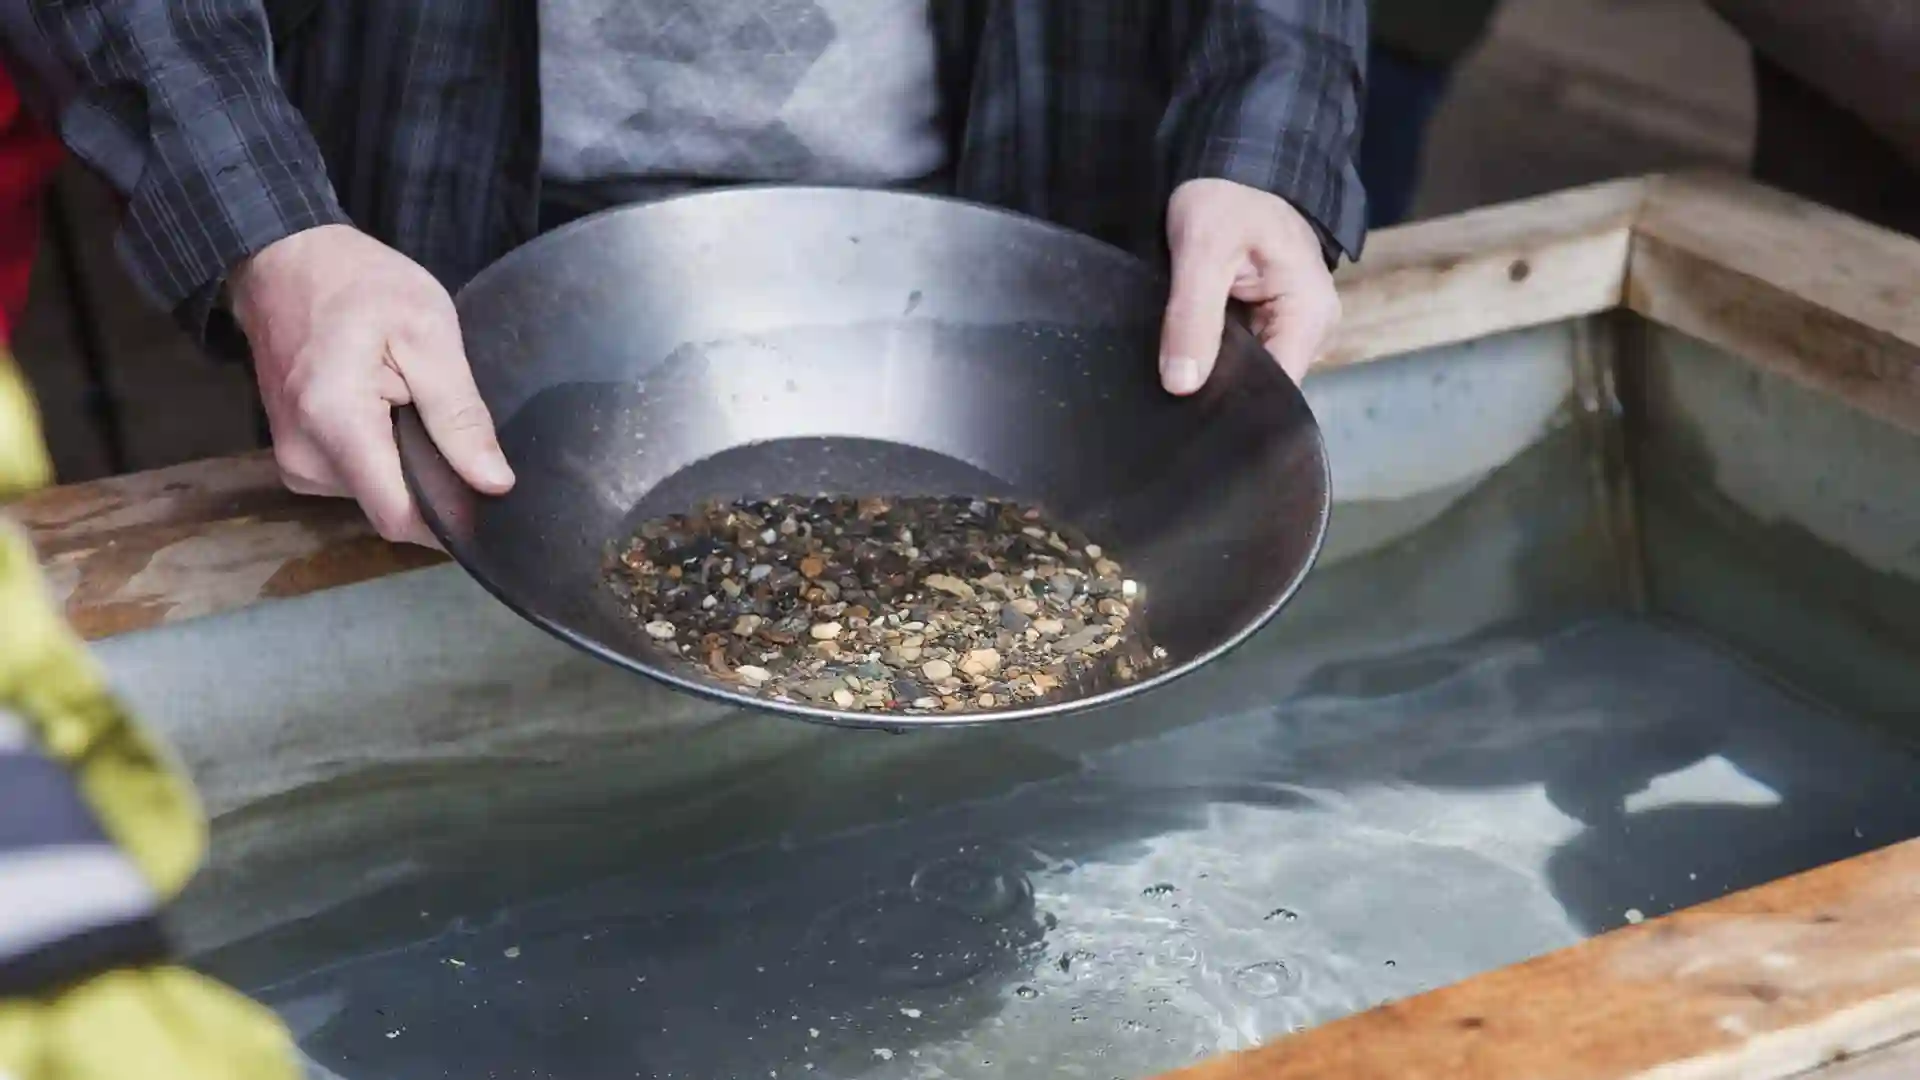 View of person panning for gold.